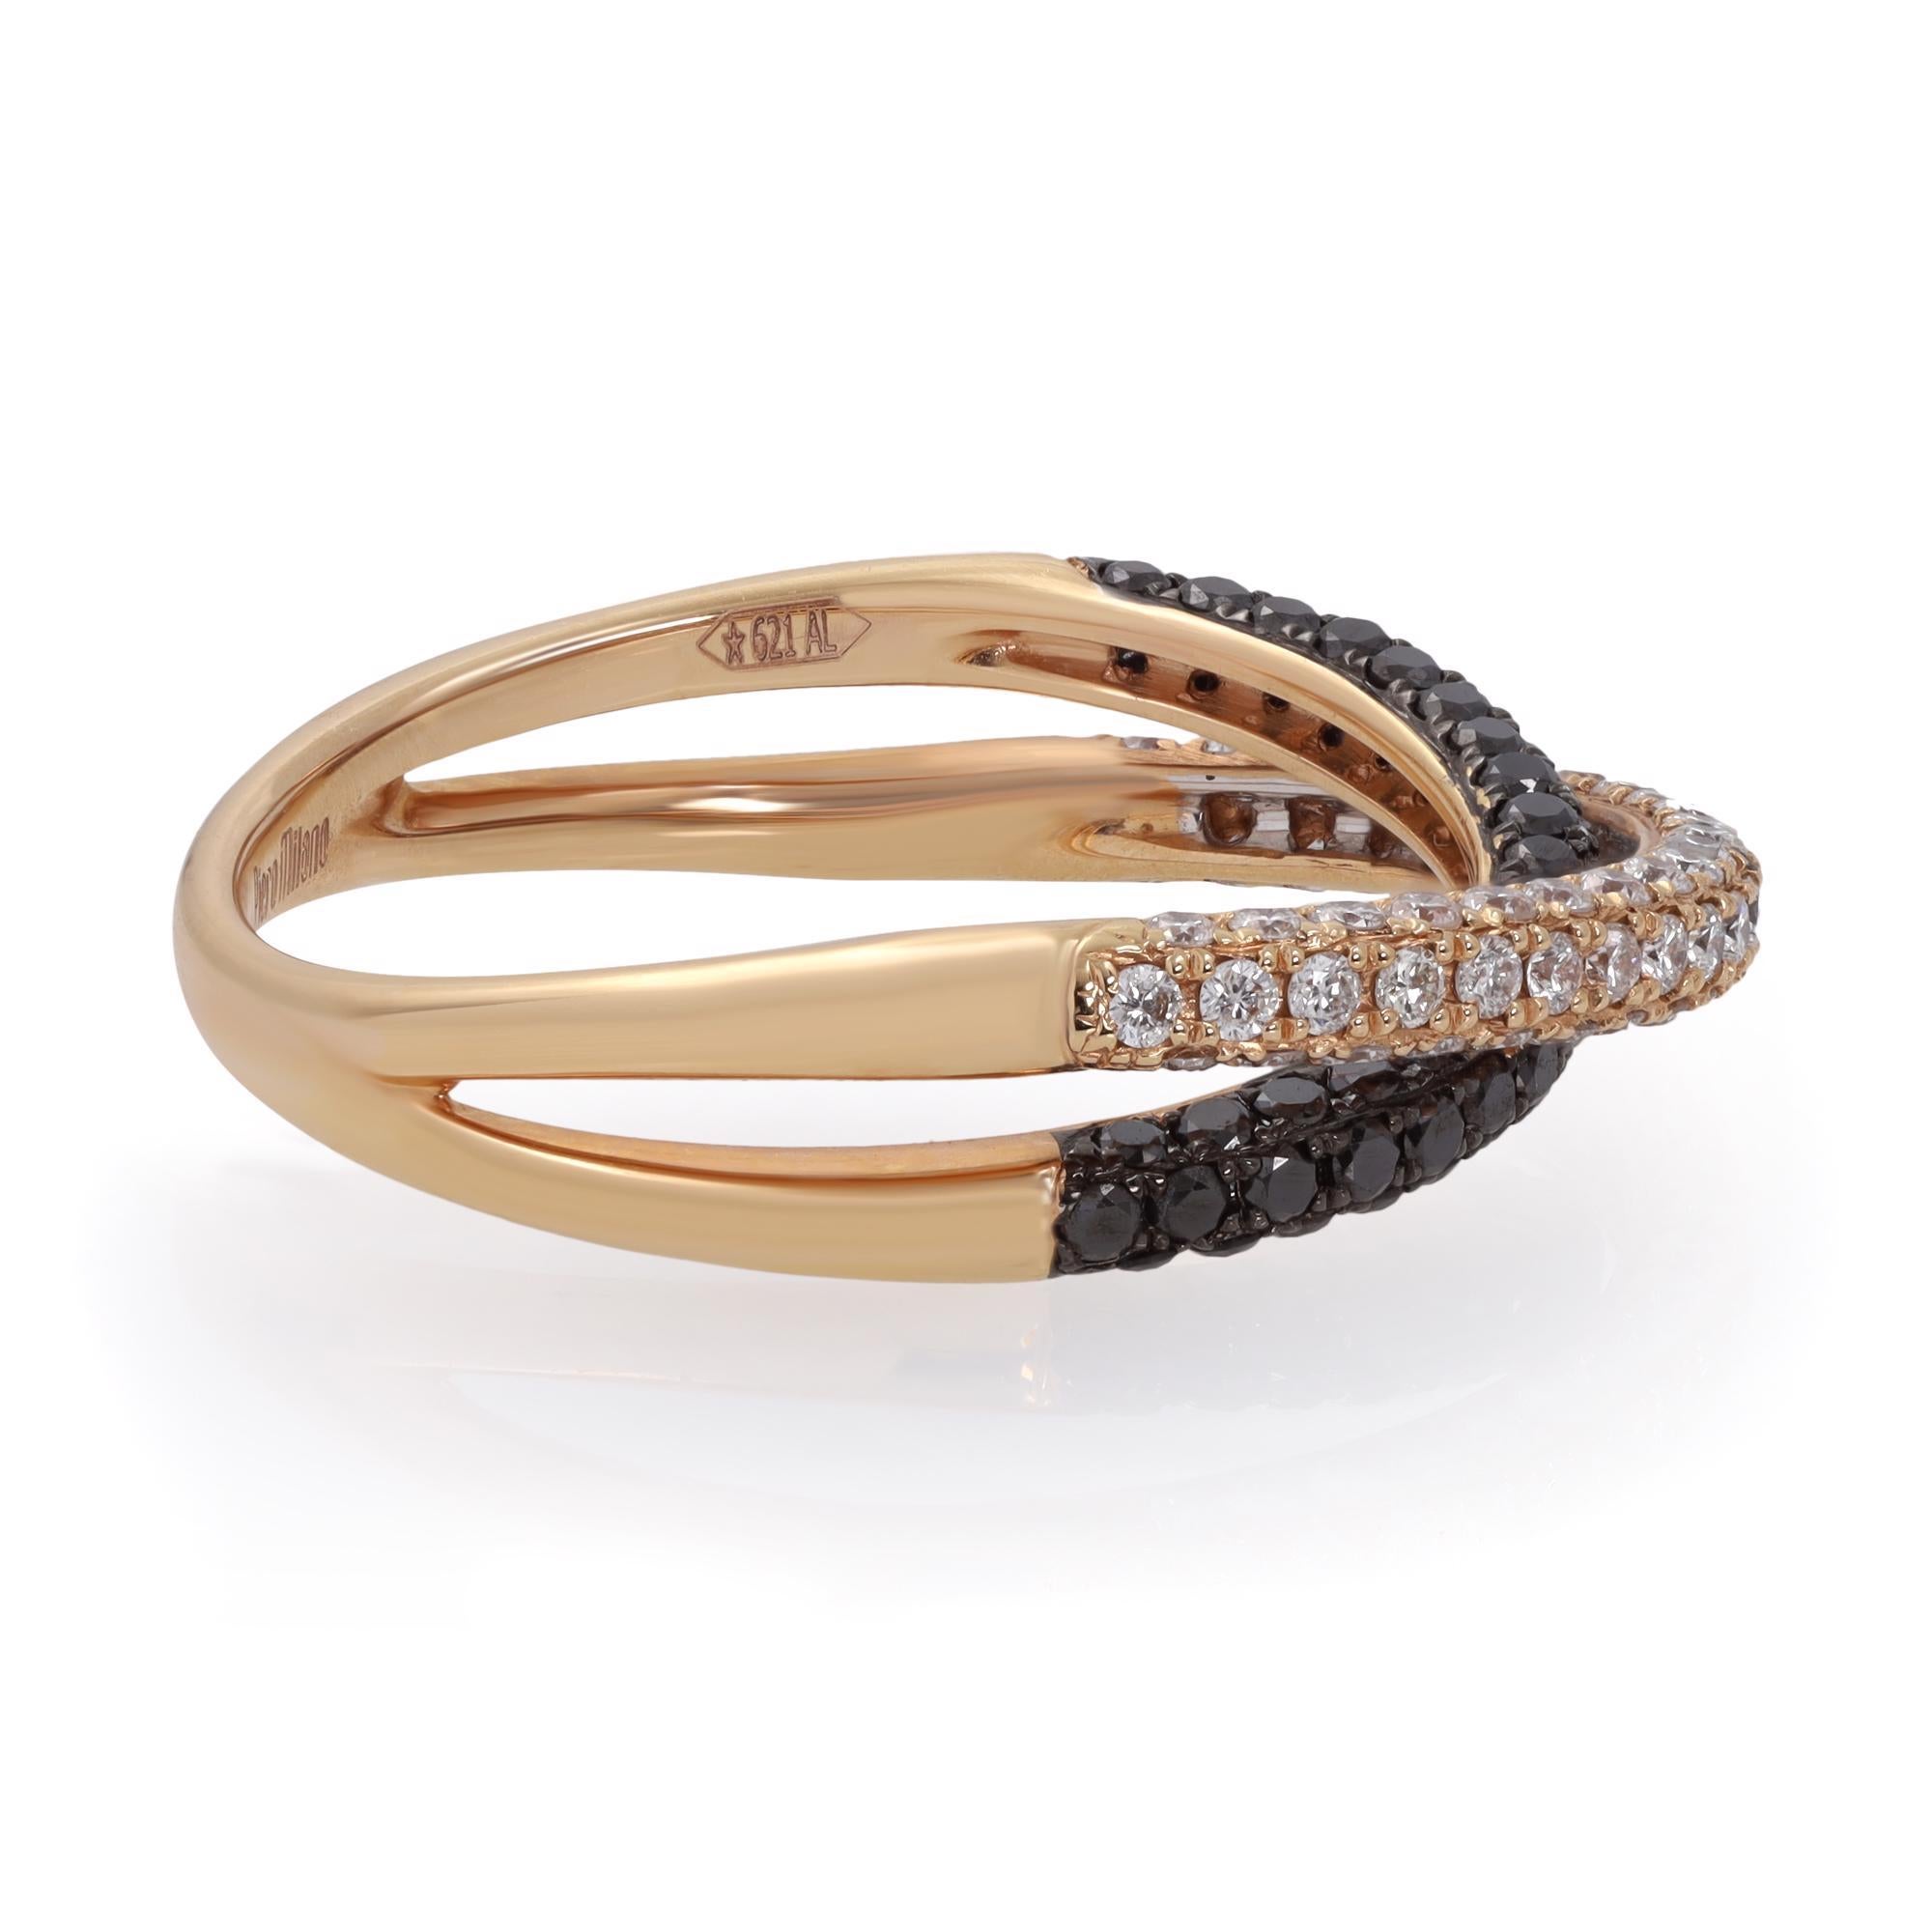 18k Rose Gold white and black diamond crossover ring by Piero Milano. This beautiful piece is set with 0.53cts of white diamond and 0.51cttw of black diamond. The Clarity G-H and Color VS-SI. Ring size 8. Comes with a box and Chronostore appraisal. 